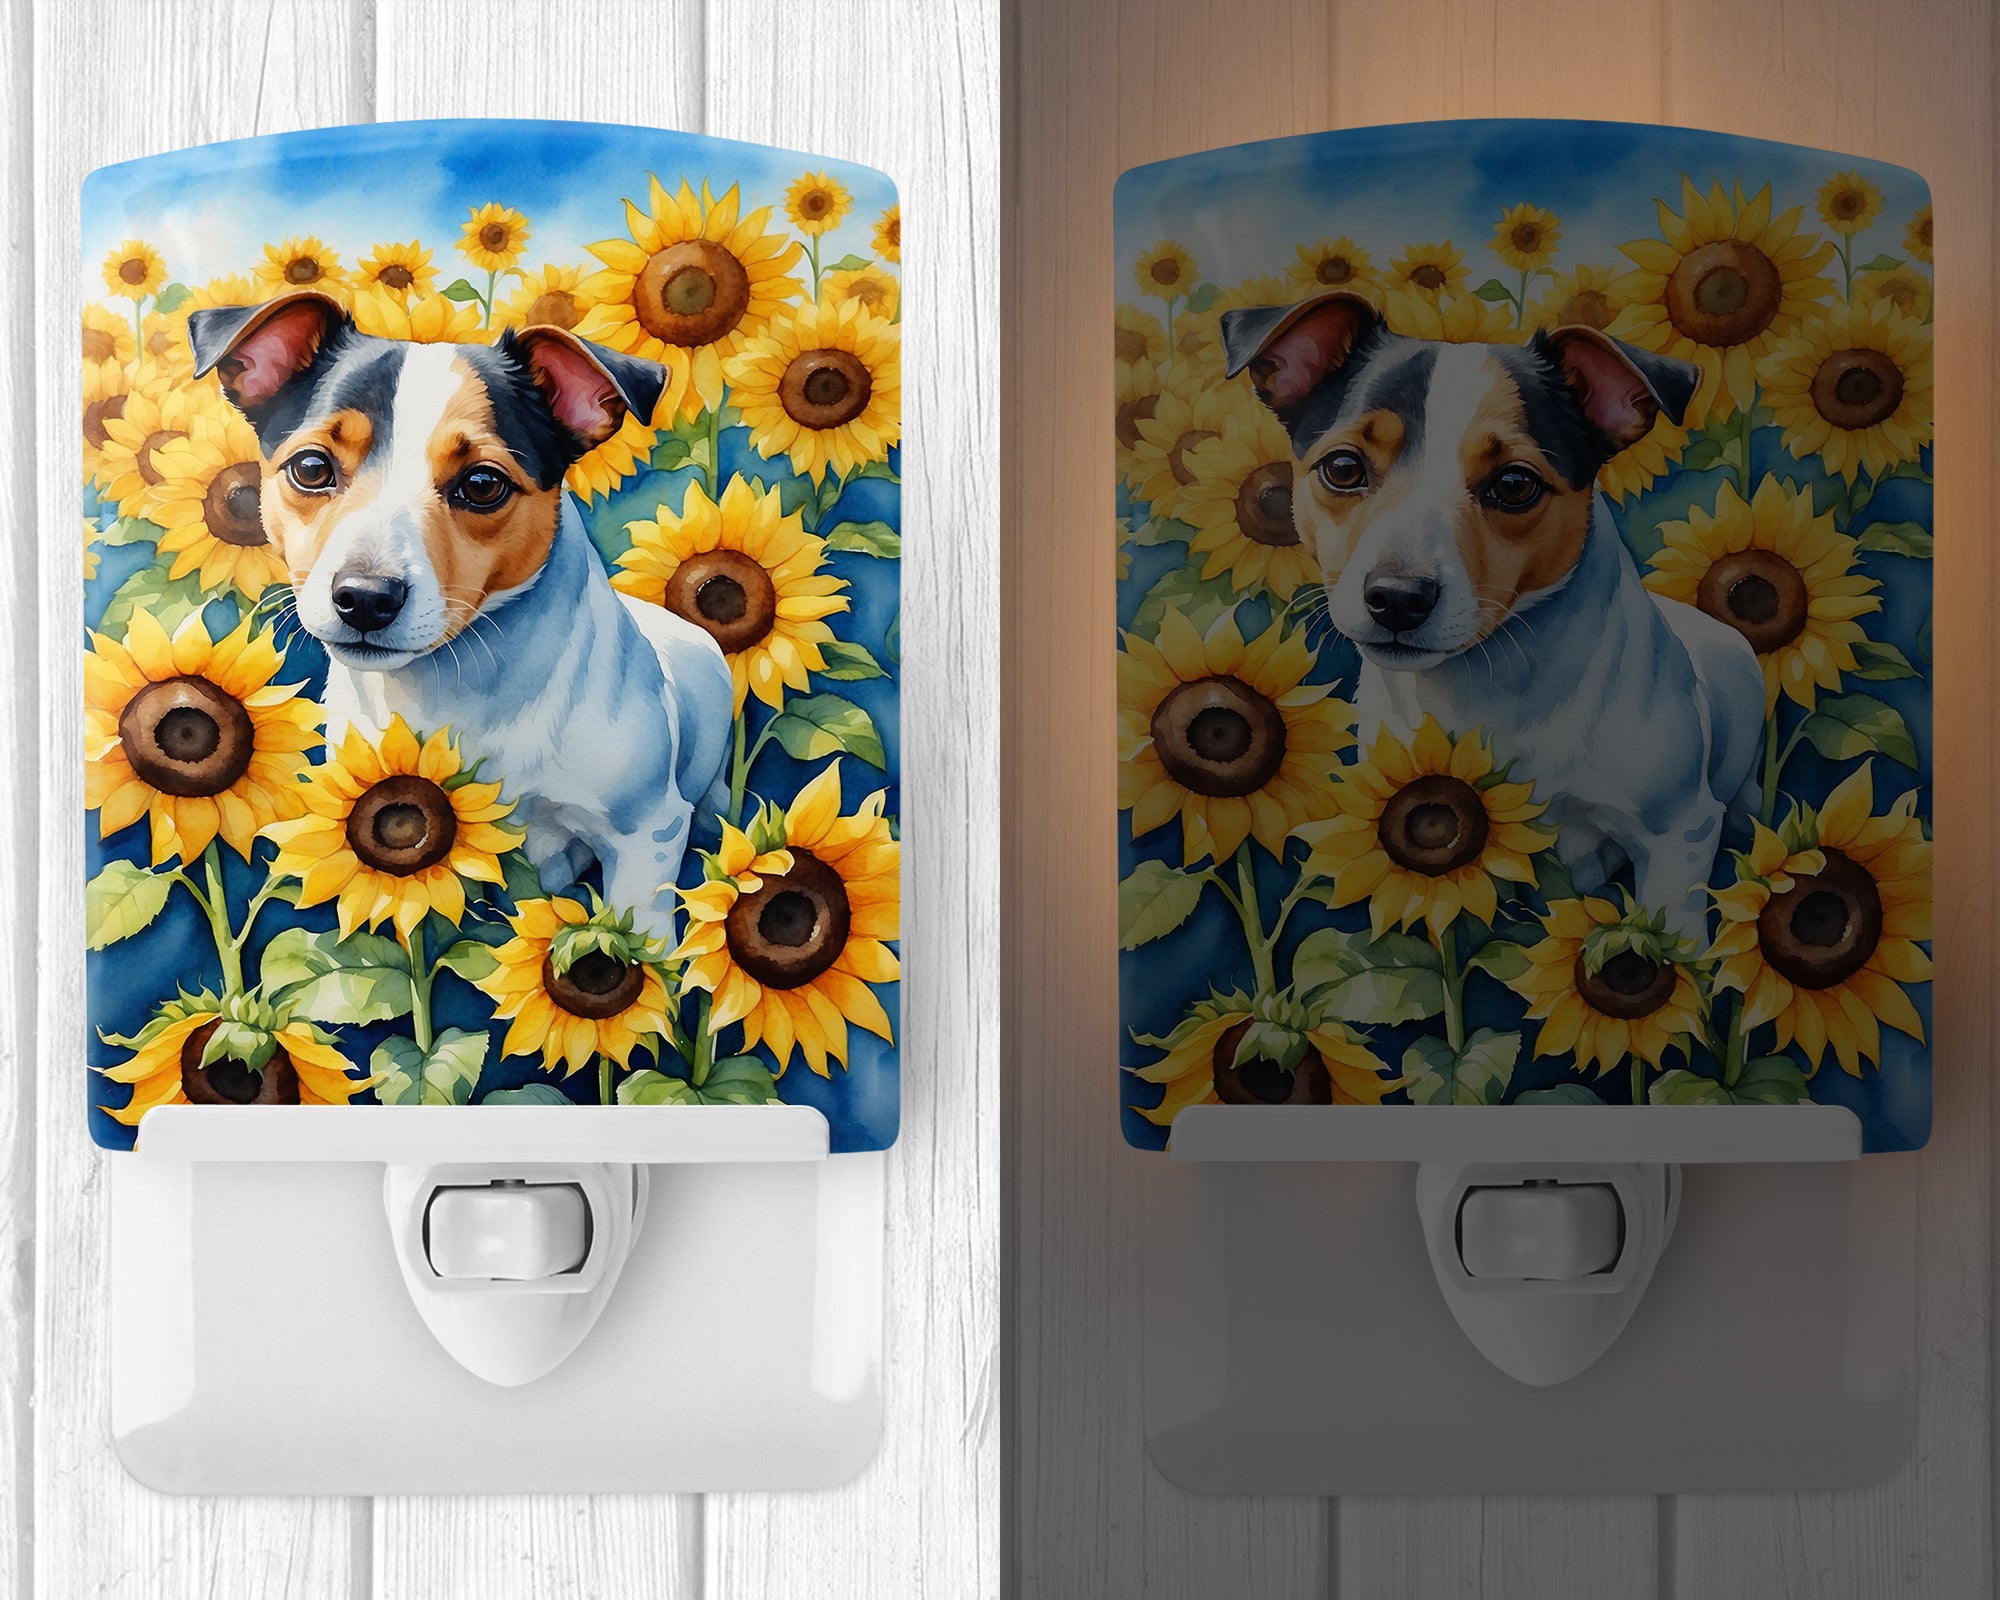 Buy this Jack Russell Terrier in Sunflowers Ceramic Night Light